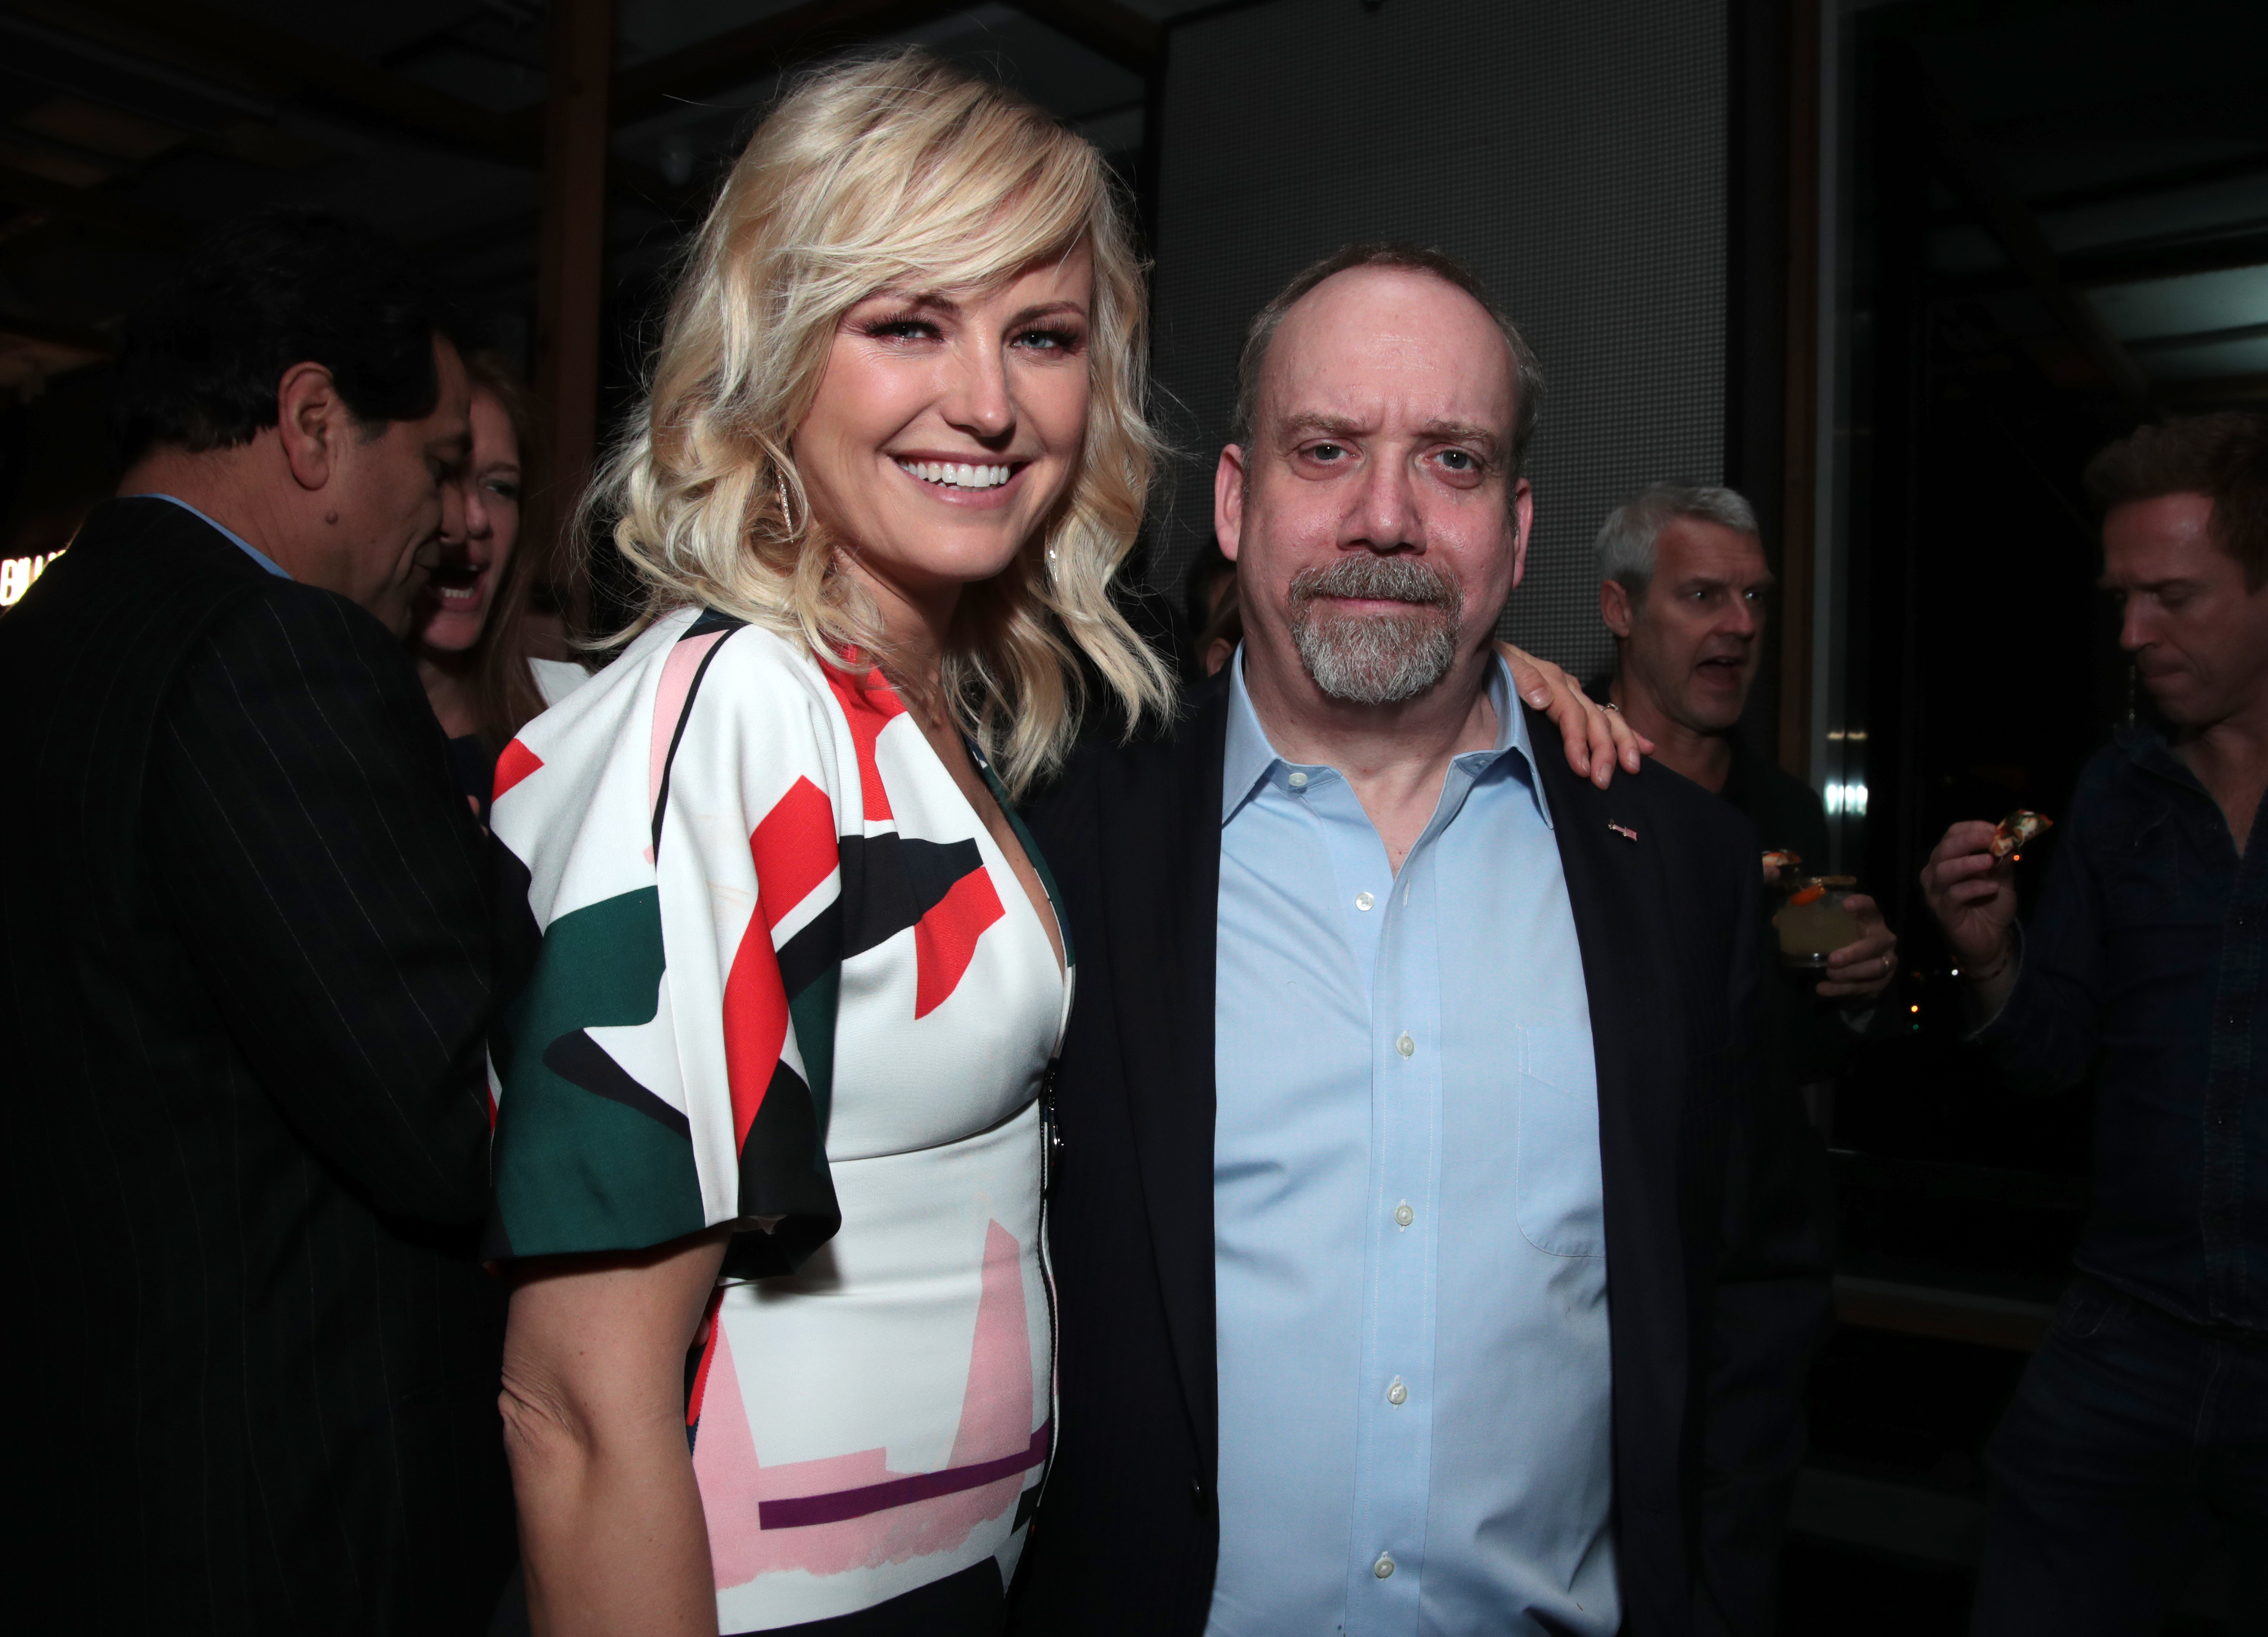 BILLIONS Season 3 Premiere at Metrograph and Cocktail Party at Mr. Purple in New York City